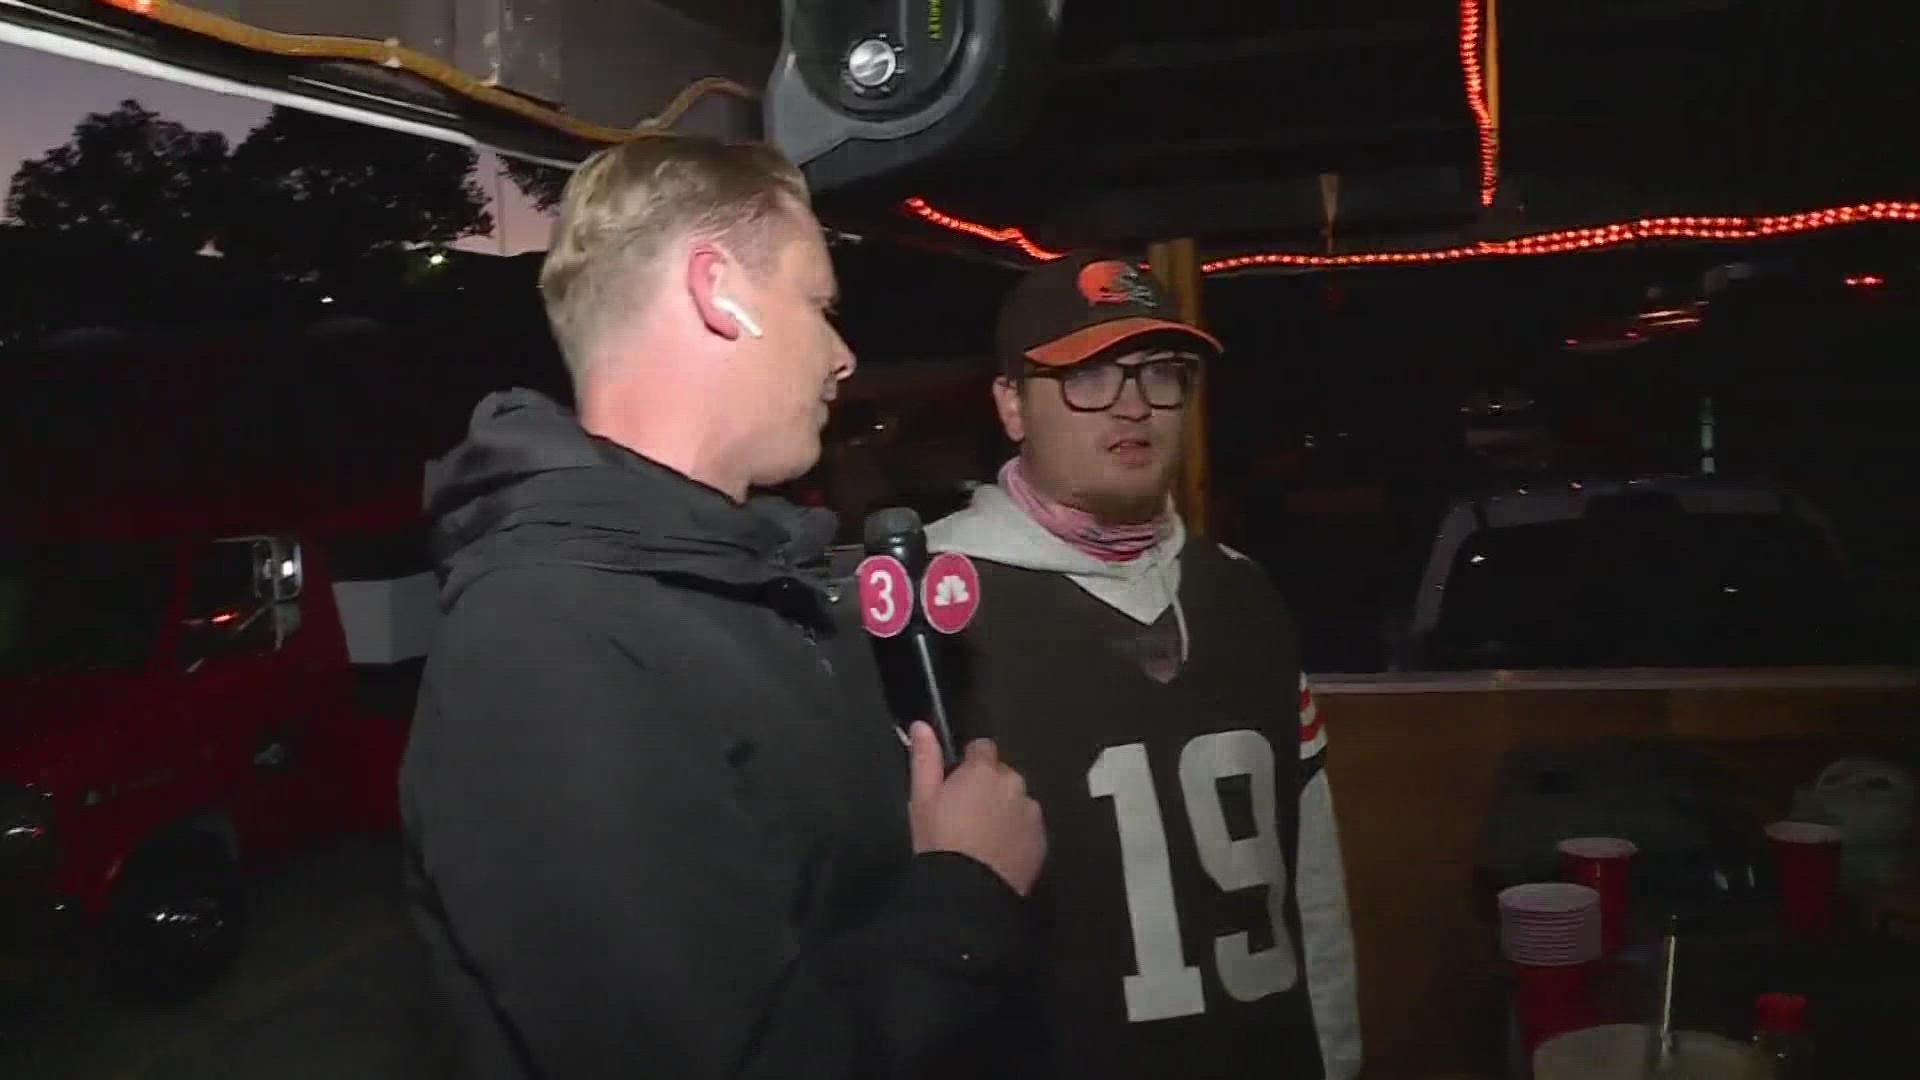 3News' Austin Love showed some of the sights and sounds of the Muni Lot ahead of the Cleveland Browns game.